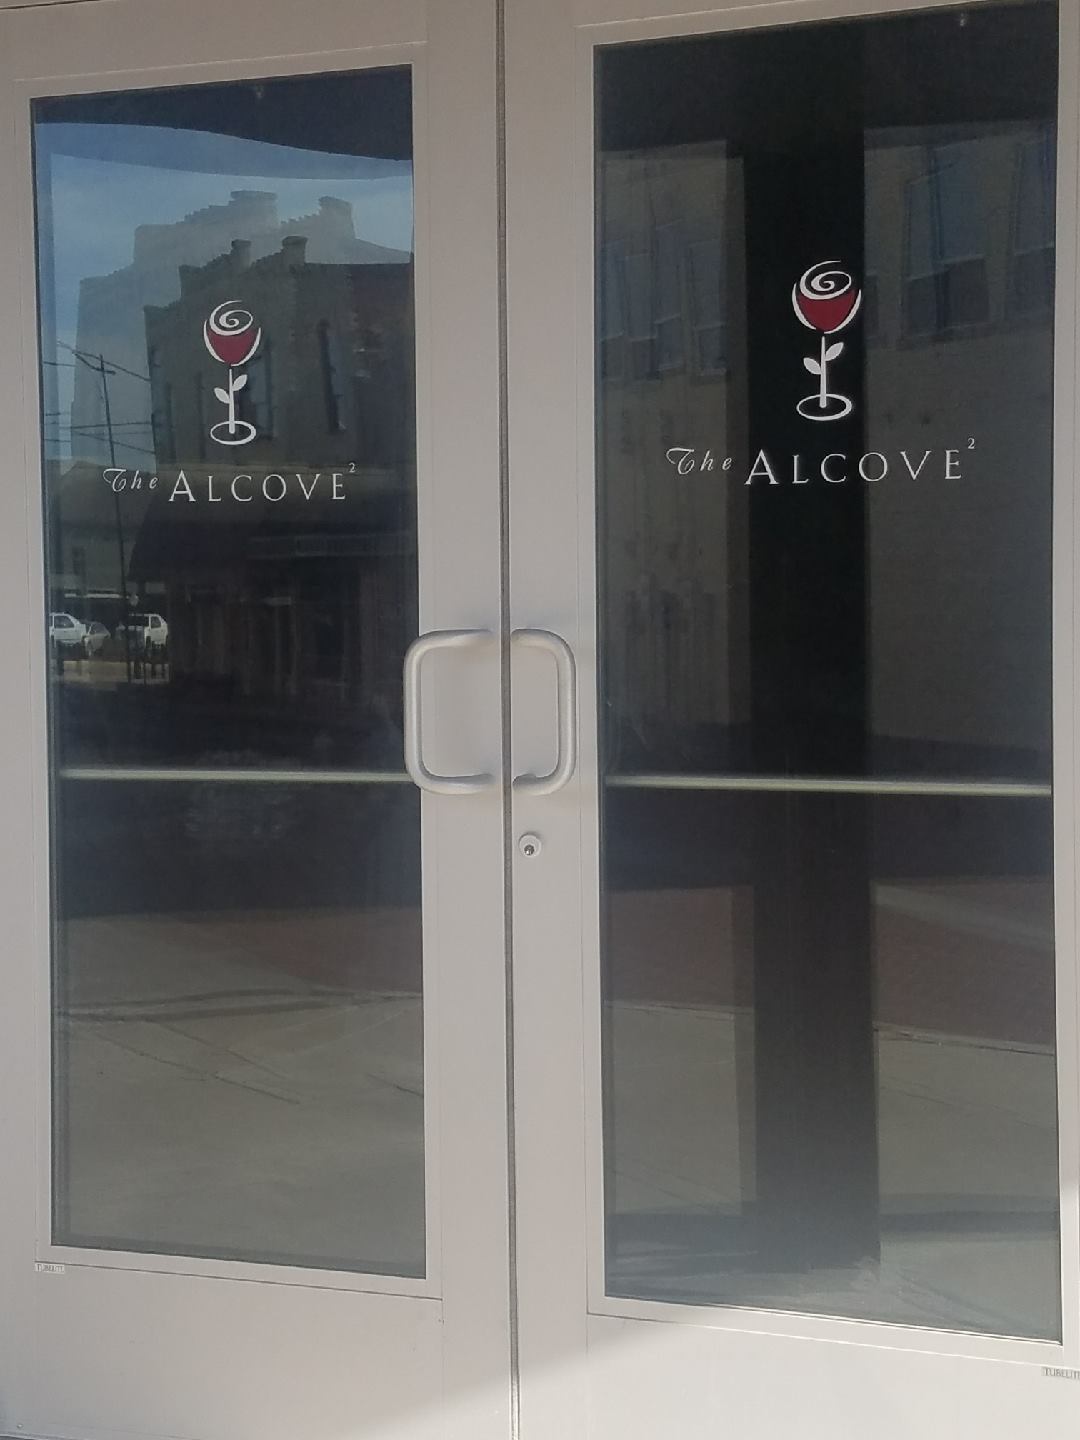 New Downtown Sulphur Springs Restaurant ‘The Alcove2’ Hosting Meet and Greet June 1st-3rd